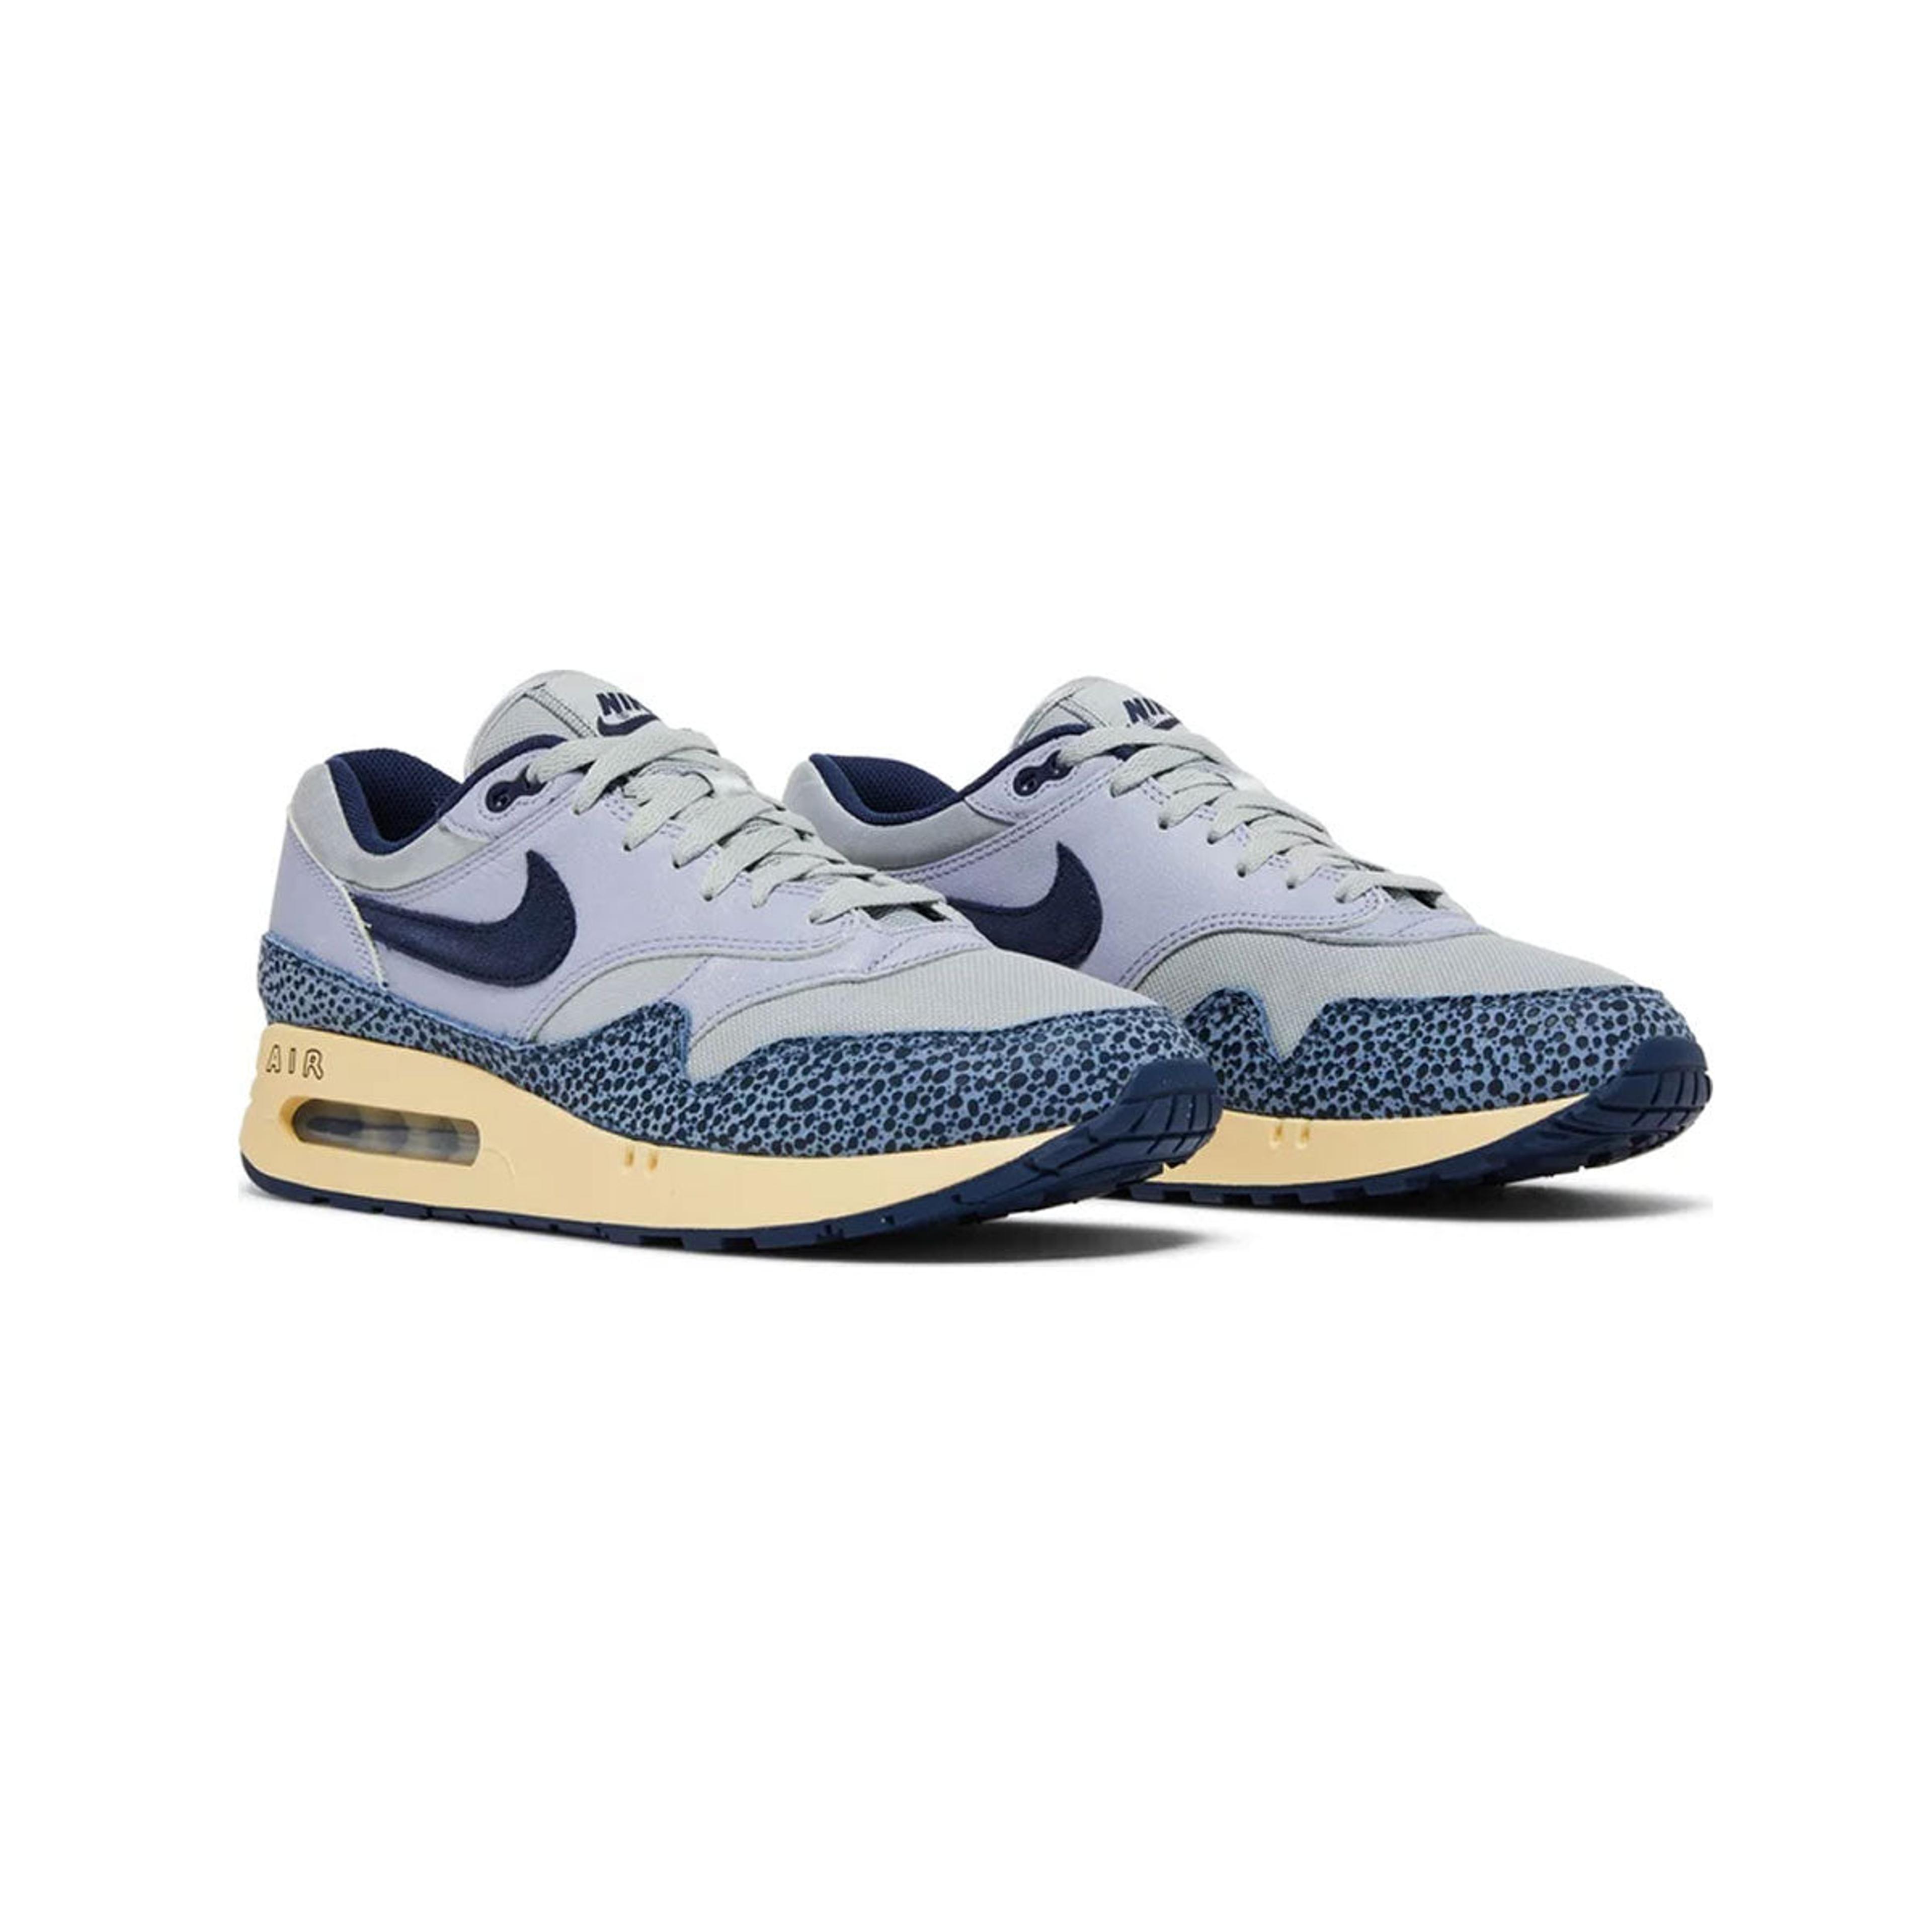 Alternate View 1 of Nike Men's Air Max 1 '86 OGBig Bubble "Lost Sketch"